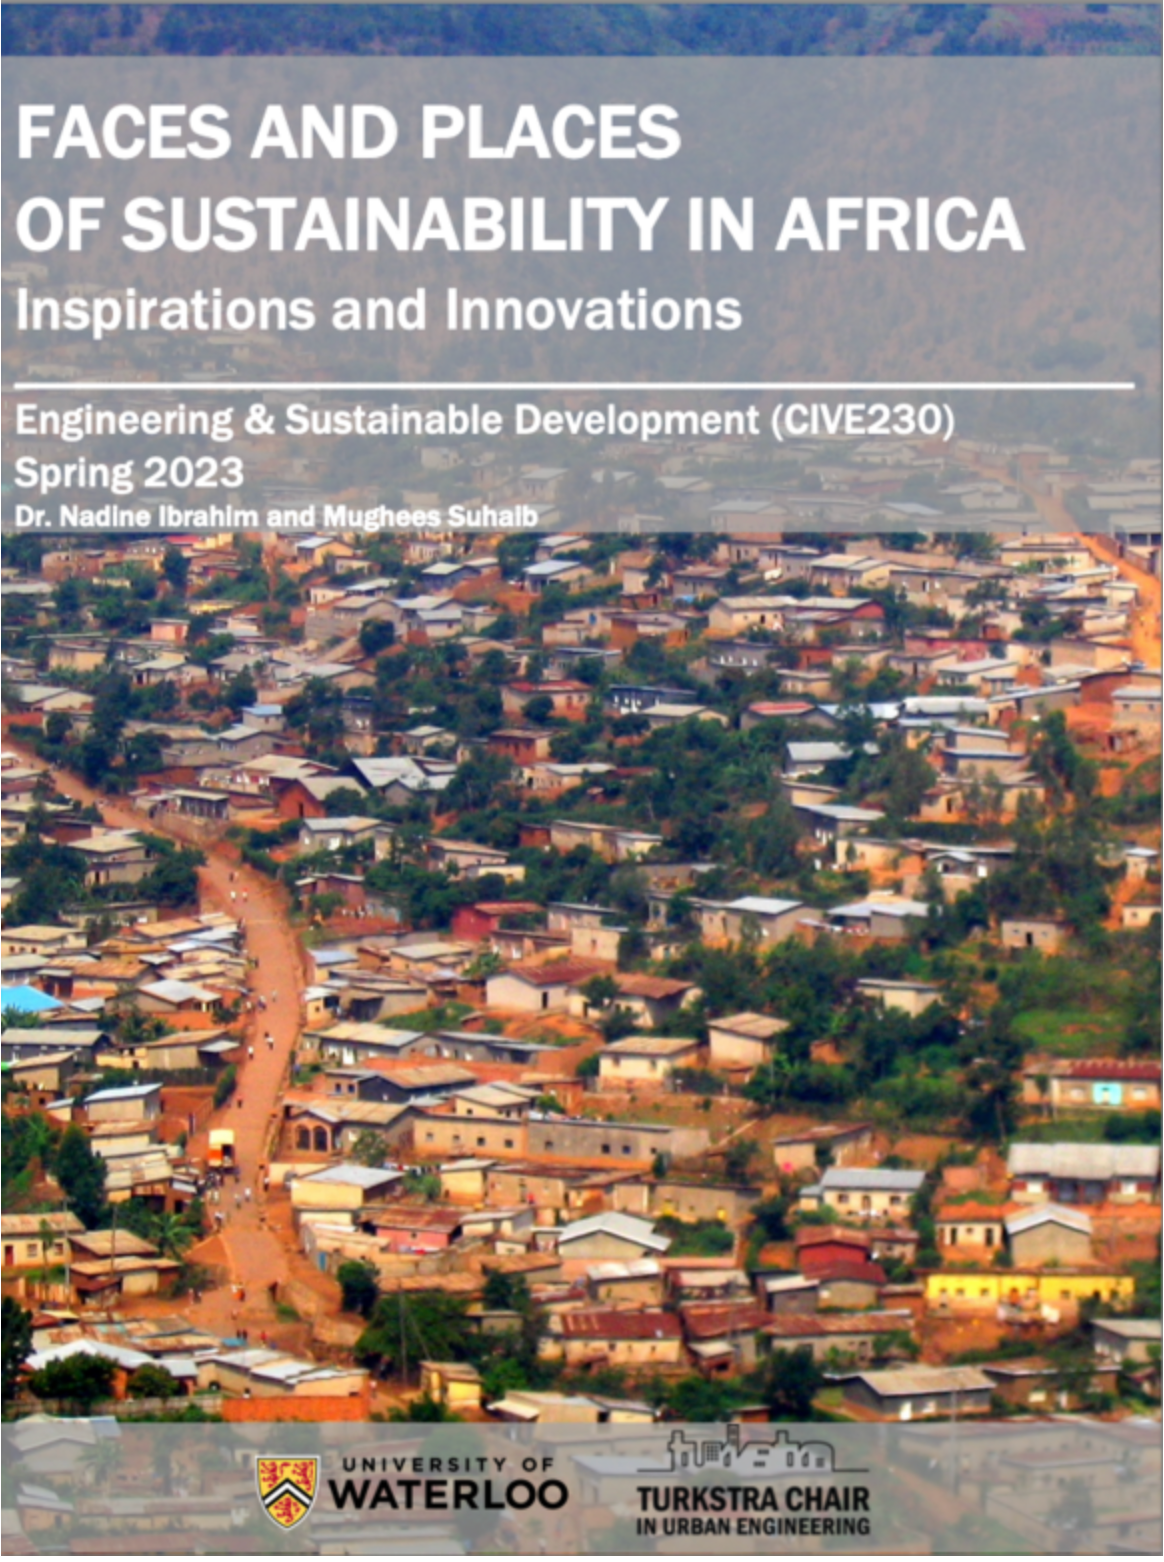 2023 E-Book title page named "Faces and Places of Sustainability in Africa"